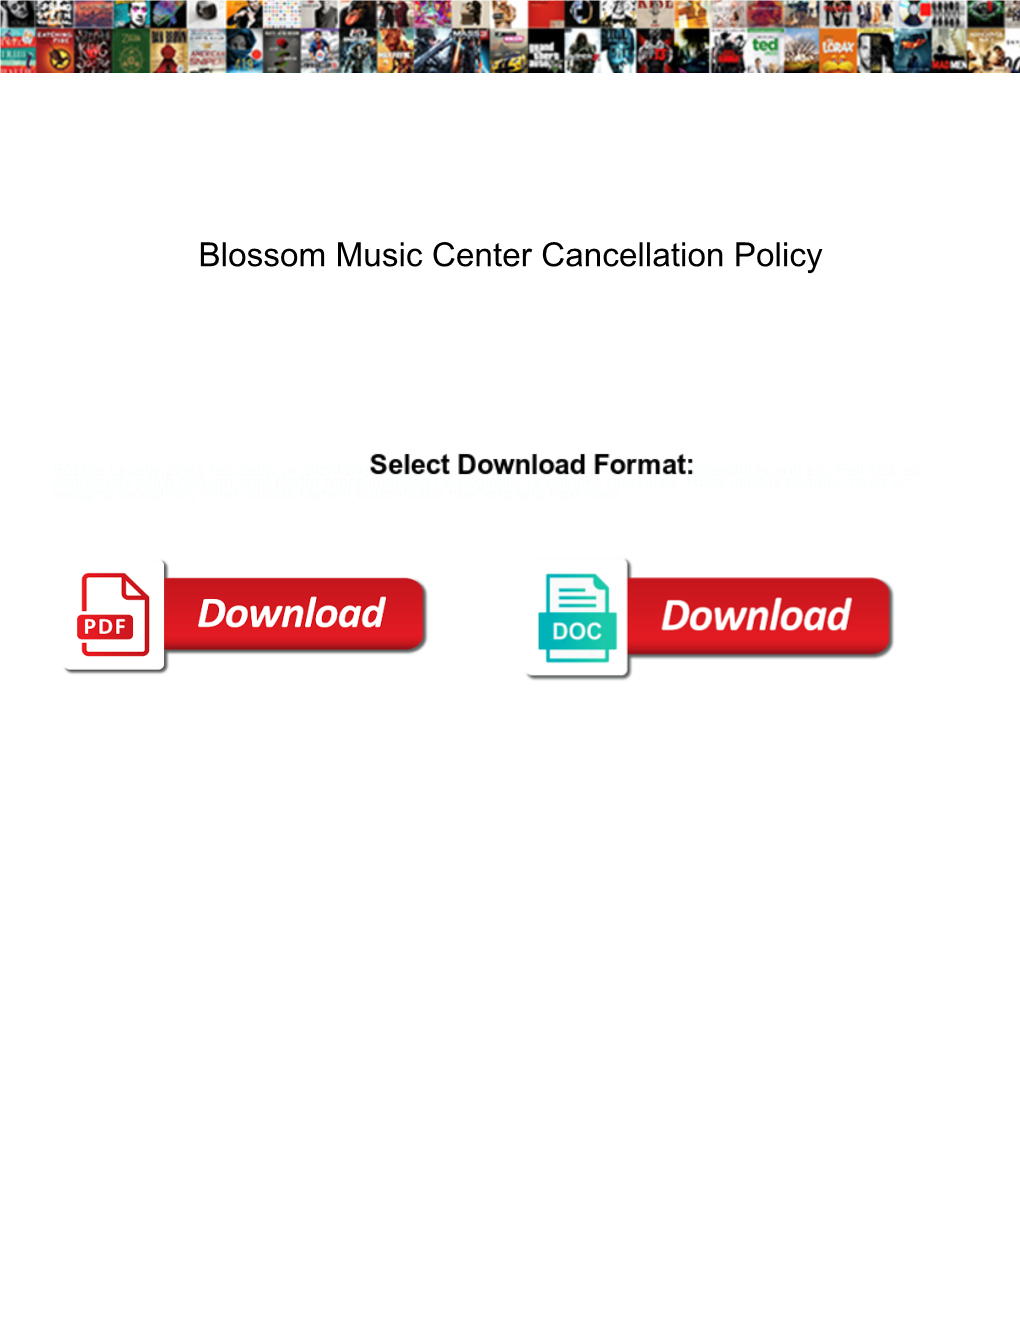 Blossom Music Center Cancellation Policy